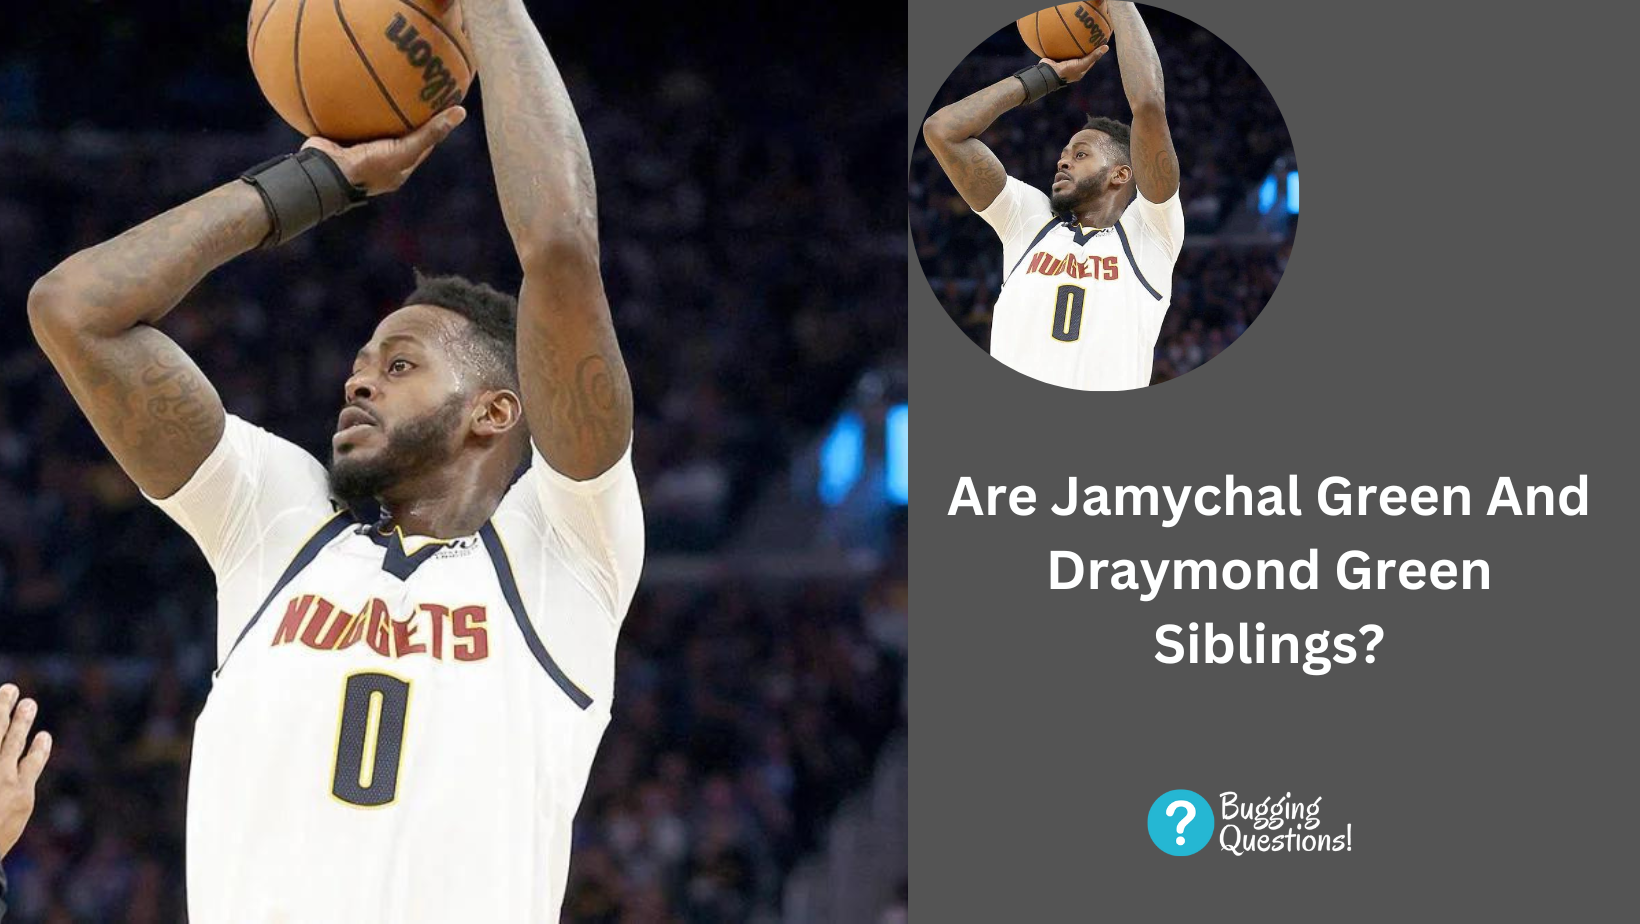 Are Jamychal Green And Draymond Green Siblings?